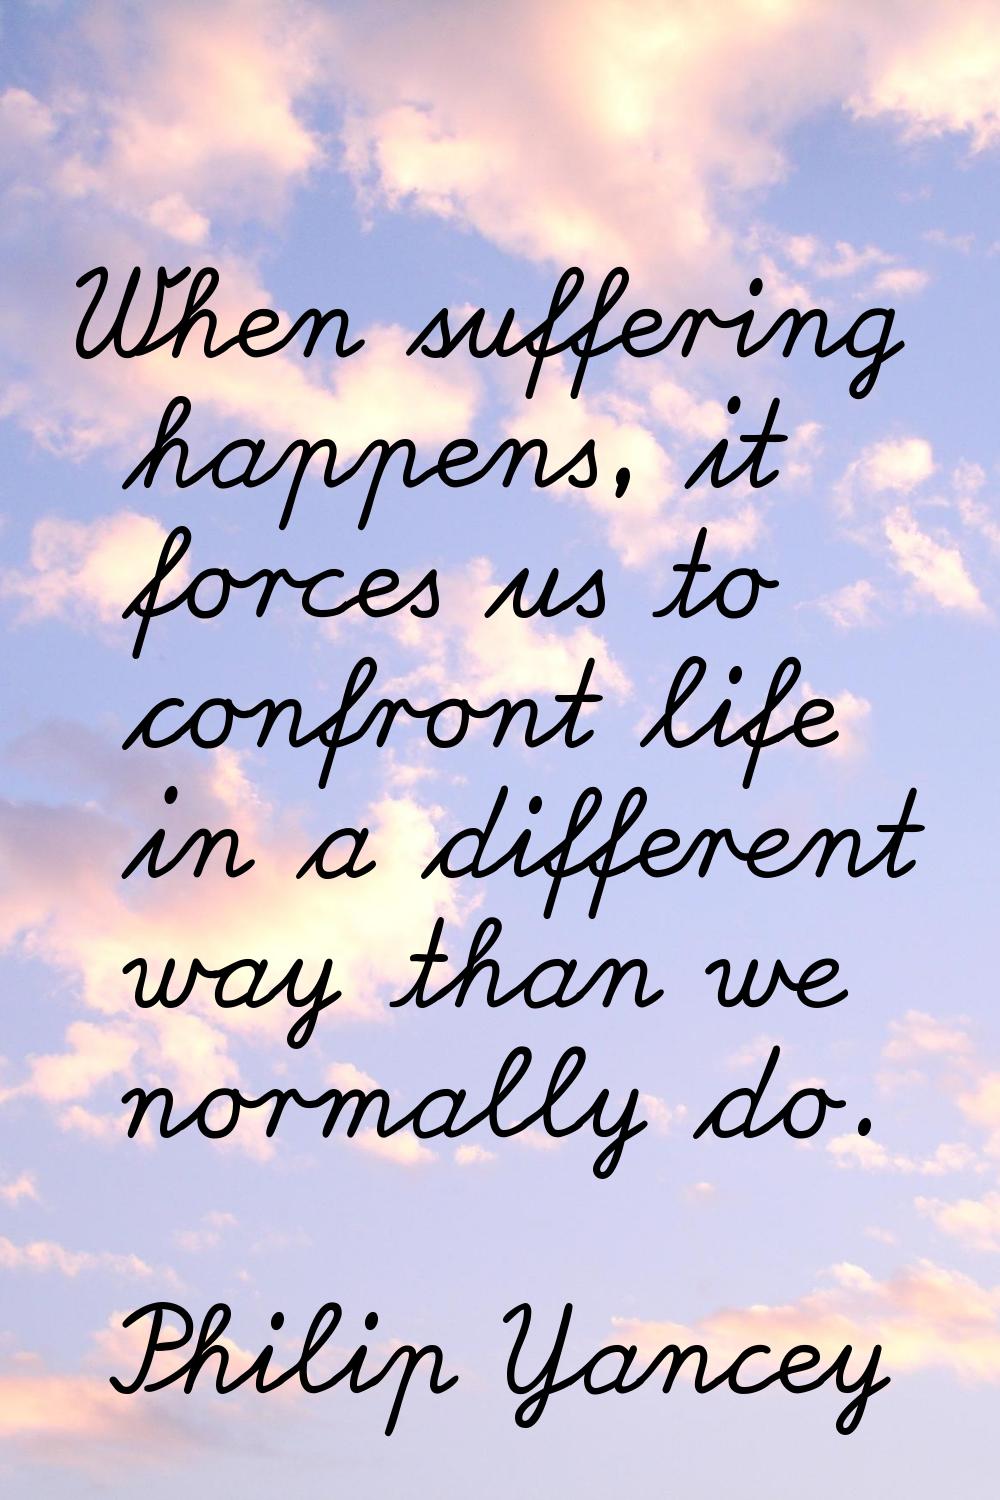 When suffering happens, it forces us to confront life in a different way than we normally do.